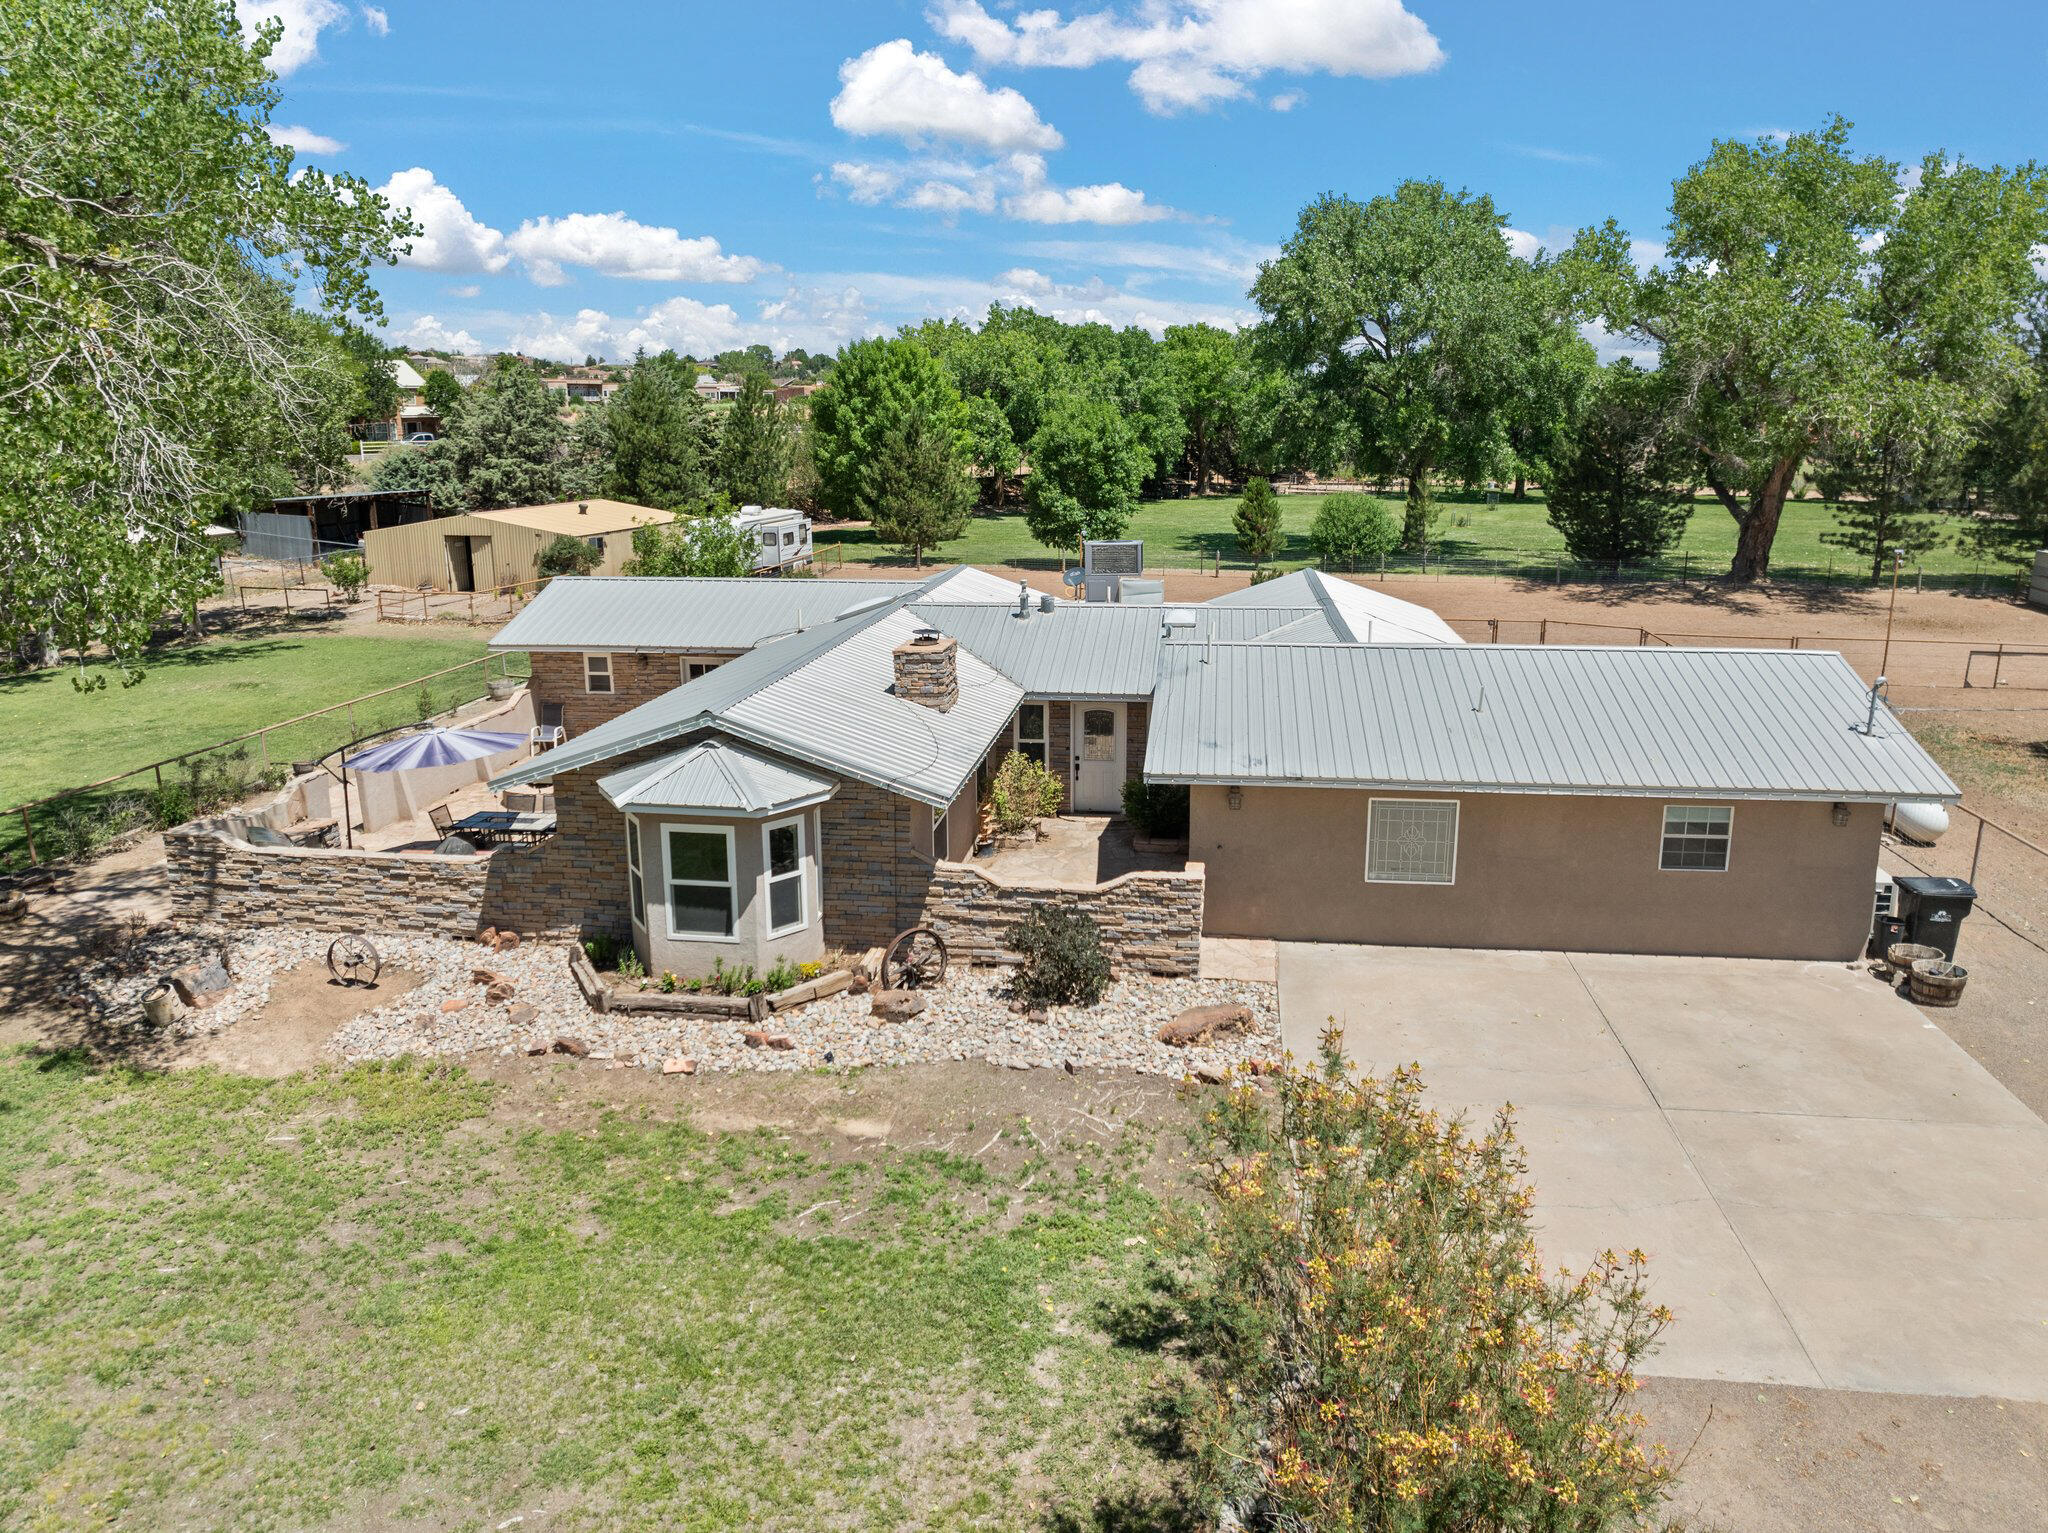 This exceptional property occupies 1.77 acres on Sichler Rd; one of the most sought-after locations in Los Lunas. Featuring approximately 2,838 sqft of living space, this home includes 5 bedrooms and 3 full baths. Updated features include a modern kitchen, dining and living room w/boasting vaulted ceilings! The second primary bedroom comes equipped with its own mini-split system, podium tub + walk-in shower. The property benefits from two wells, w/possible irrigation options and is fully secured with pipe fencing. Convenient side yard access leads back to equestrian amenities abound w/a barn featuring electricity, 4 stalls, a tack room, and well-lit arena. French doors open to a charming flagstone patio, featuring a built-in BBQ grill & fire pit, ideal for gatherings & outdoor enjoyment!